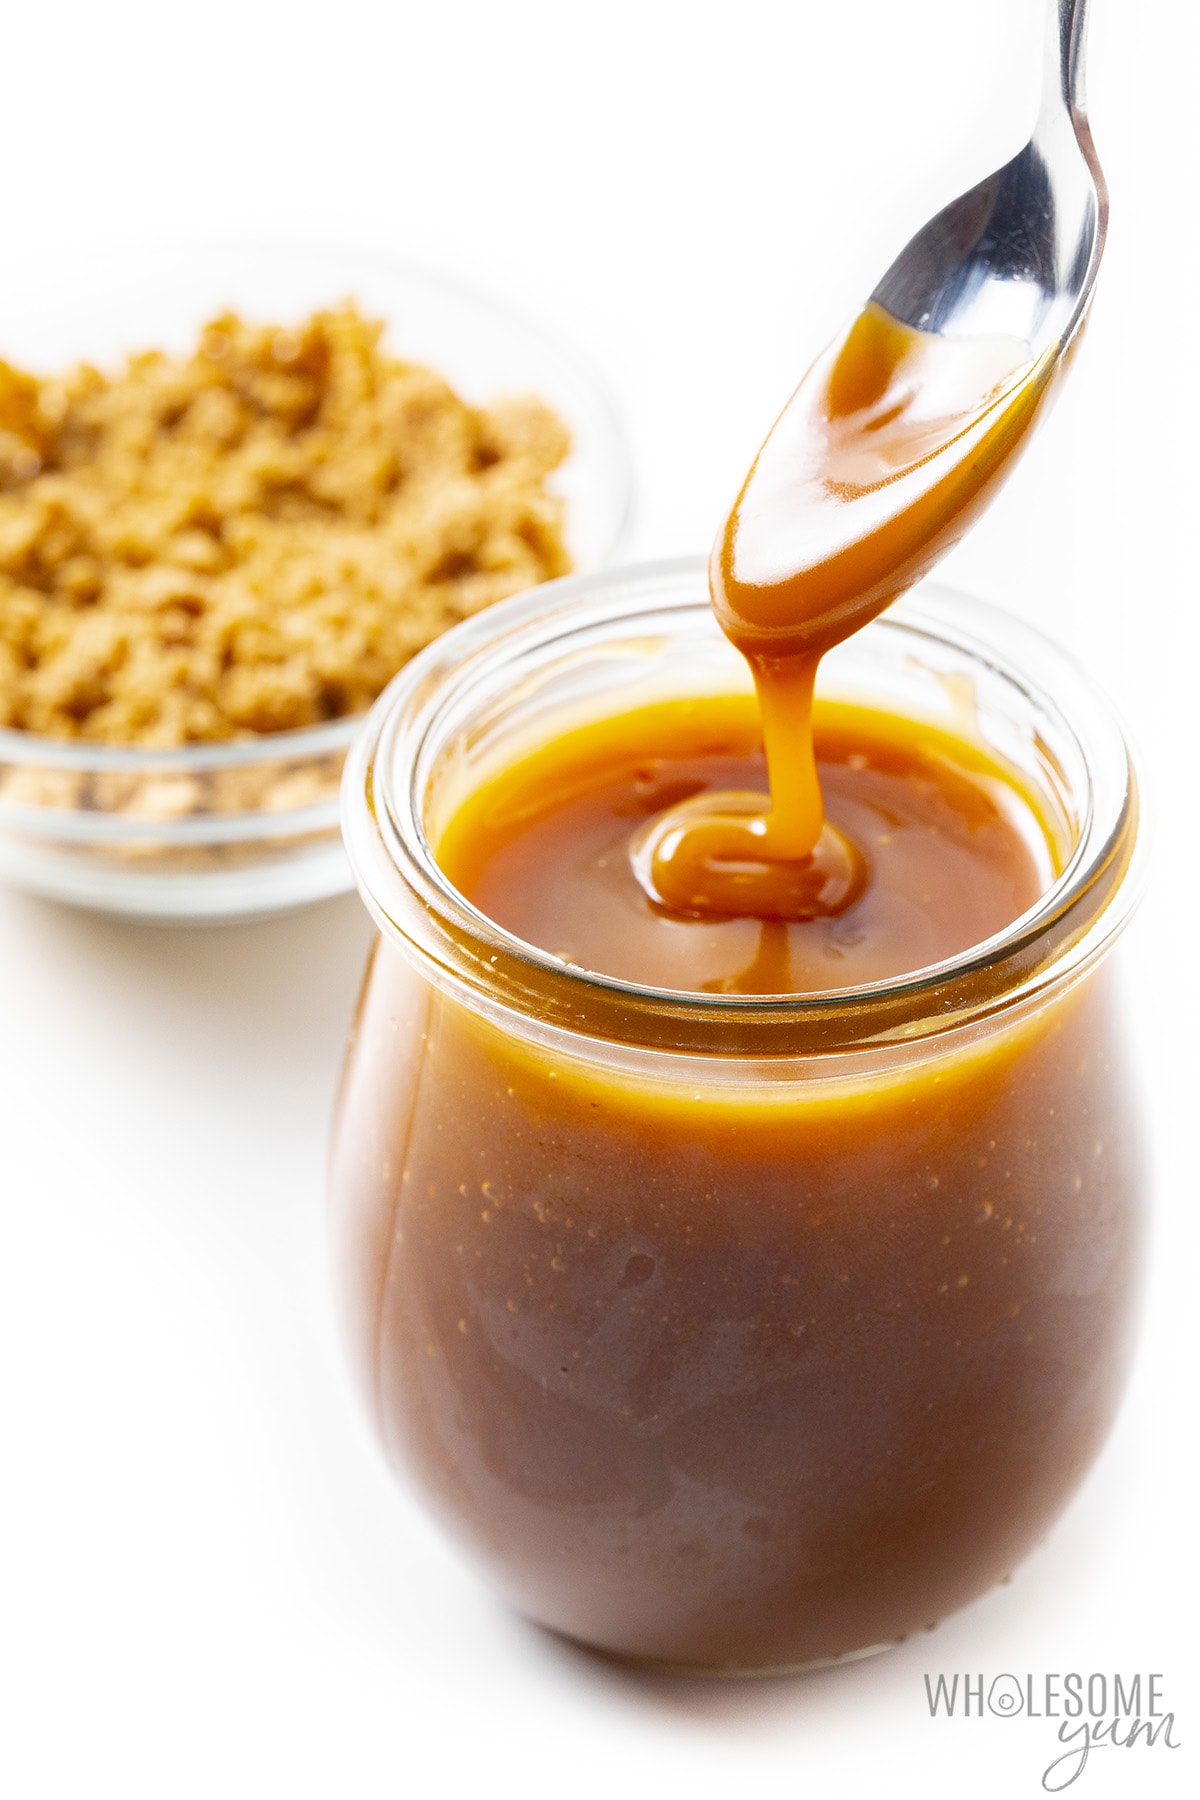 Canned sugar-free caramel sauce is ready to use.